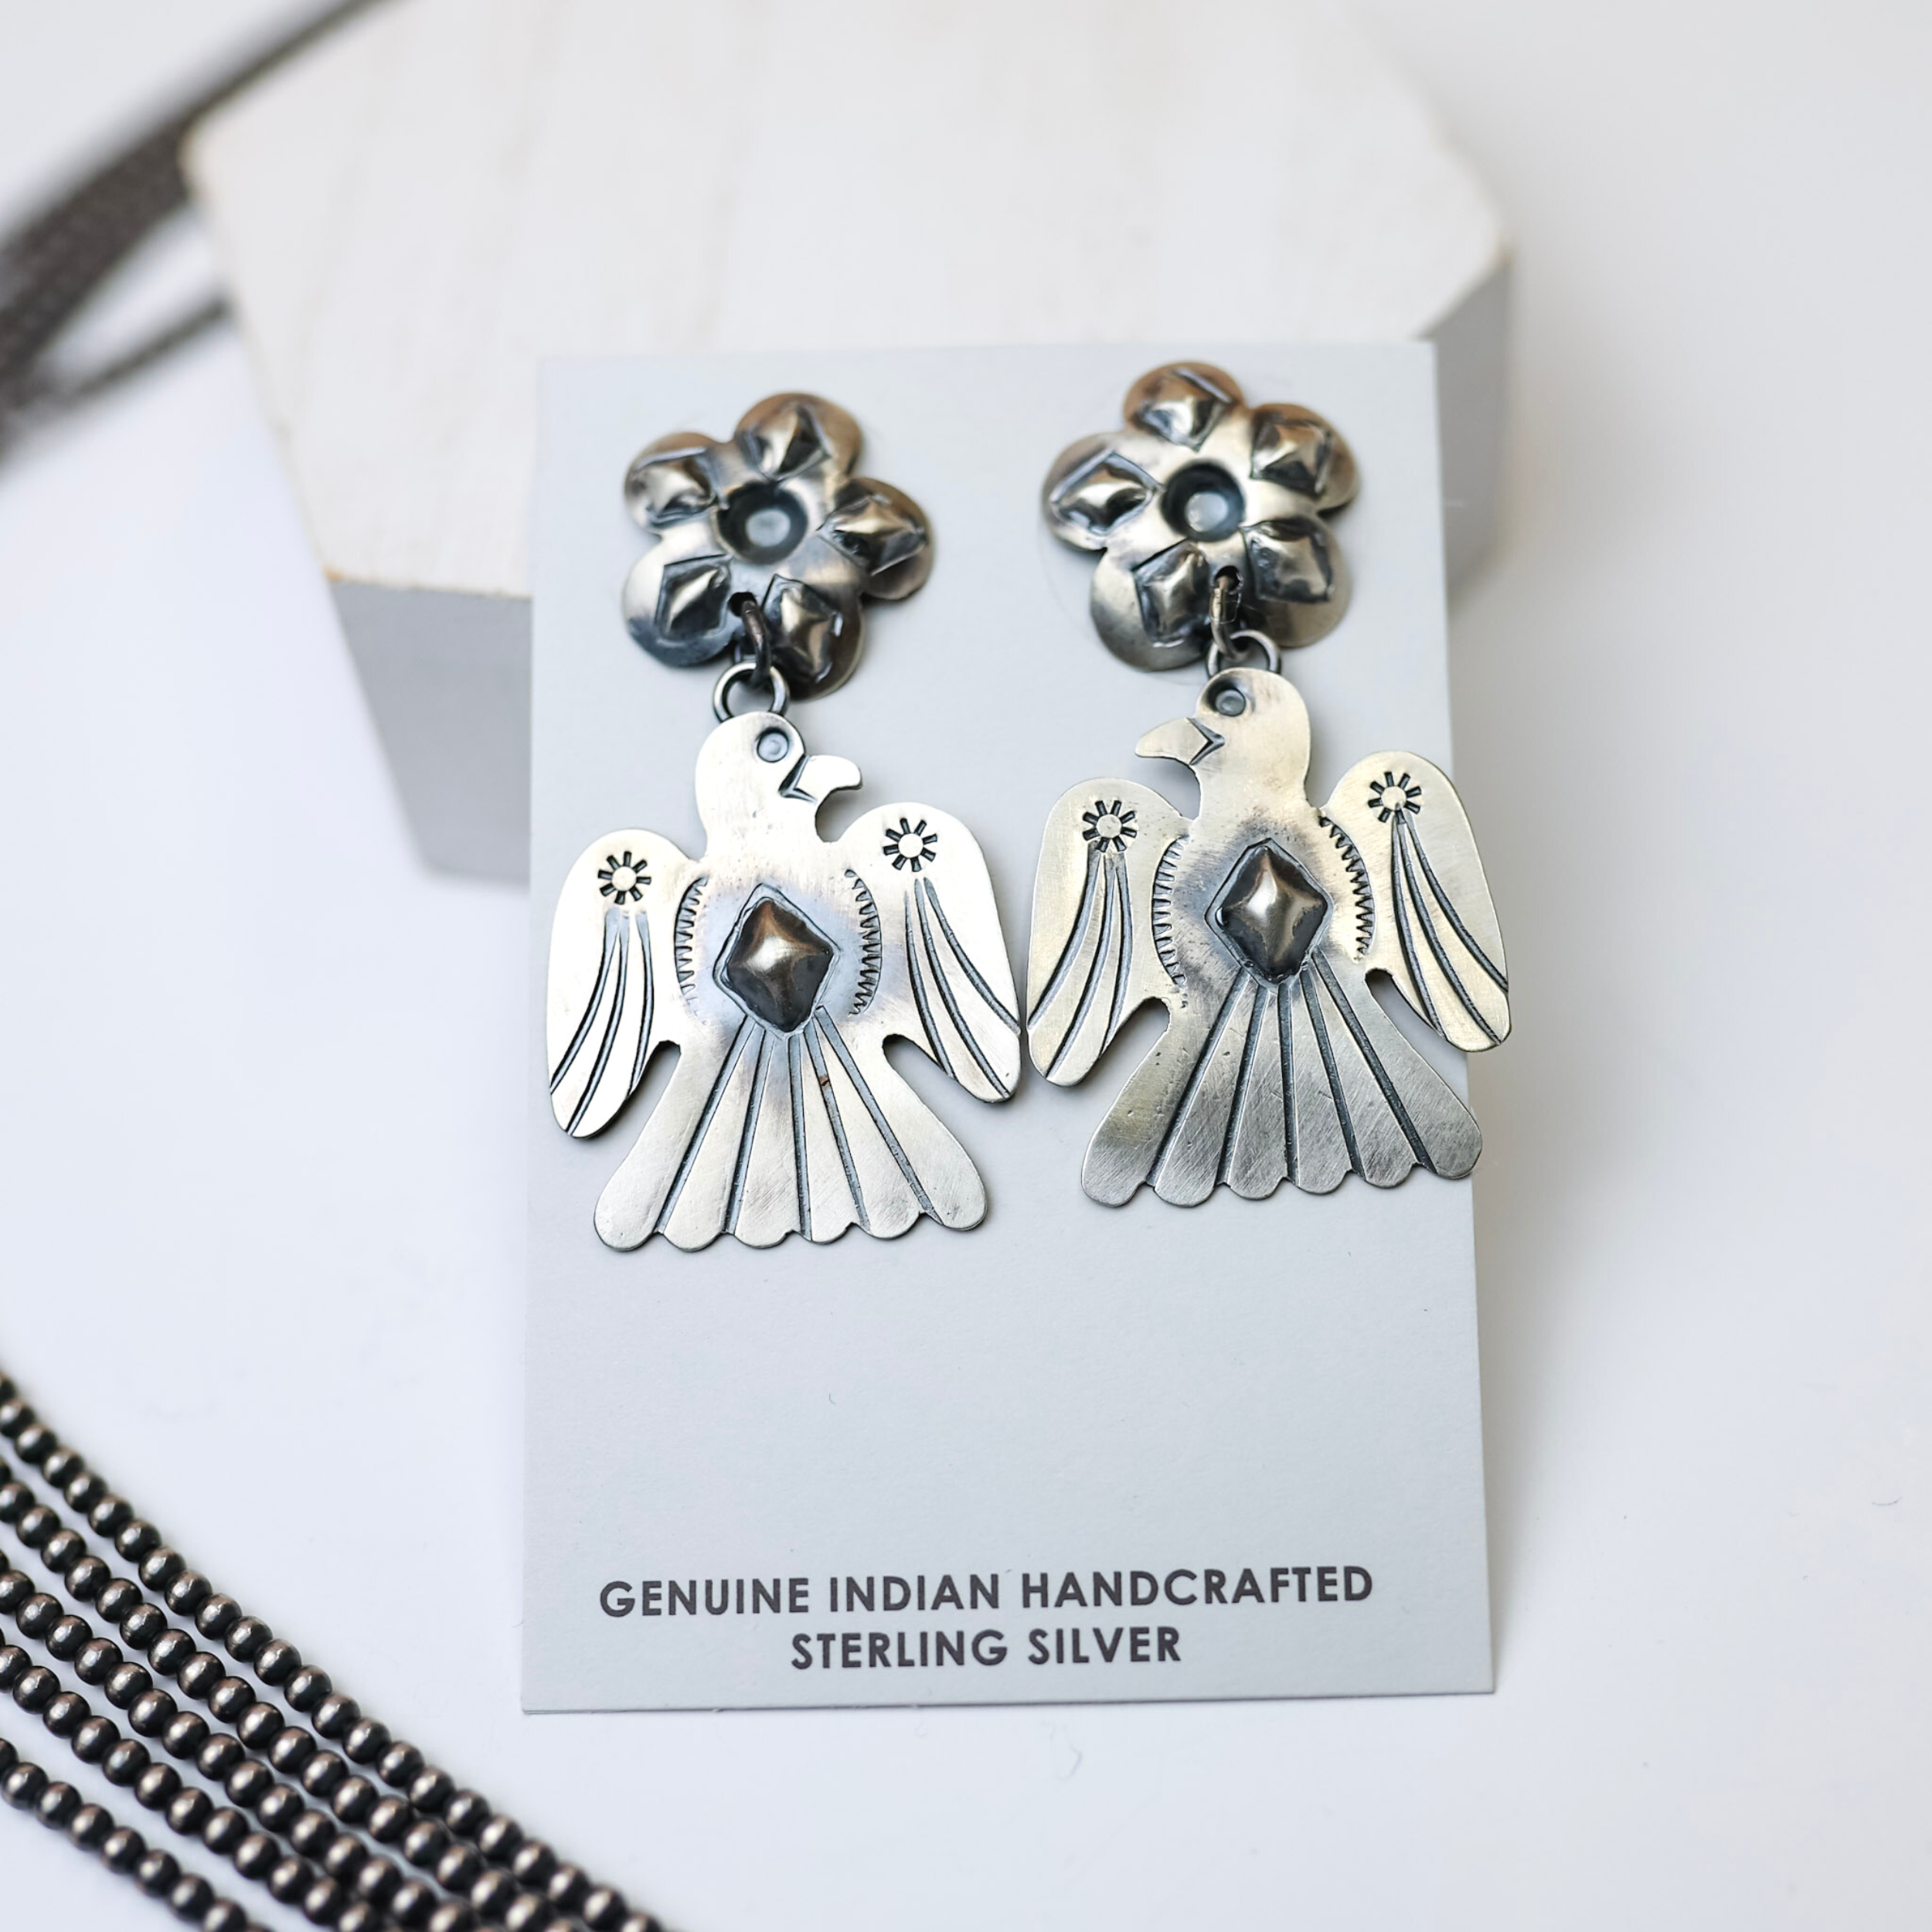 Tim Yazzie Navajo Handmade Sterling Silver Flower Post Thunderbird Drop Earrings is centered in the middle of the picture, with navajo pearls on the left of the earrings. All is on a solid white background. 